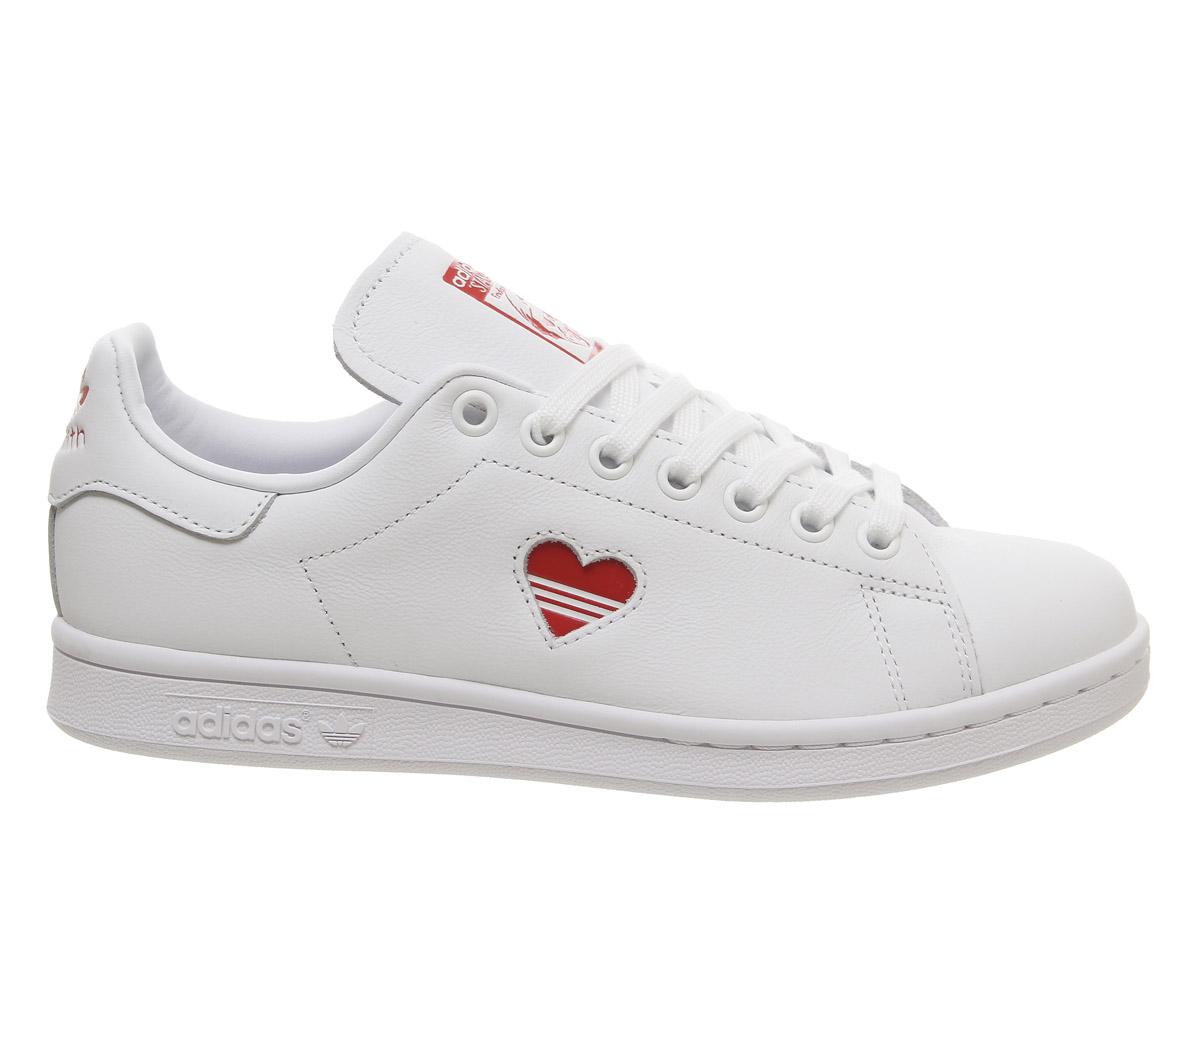 adidas Stan Smith Trainers White Red Heart - Hers trainers